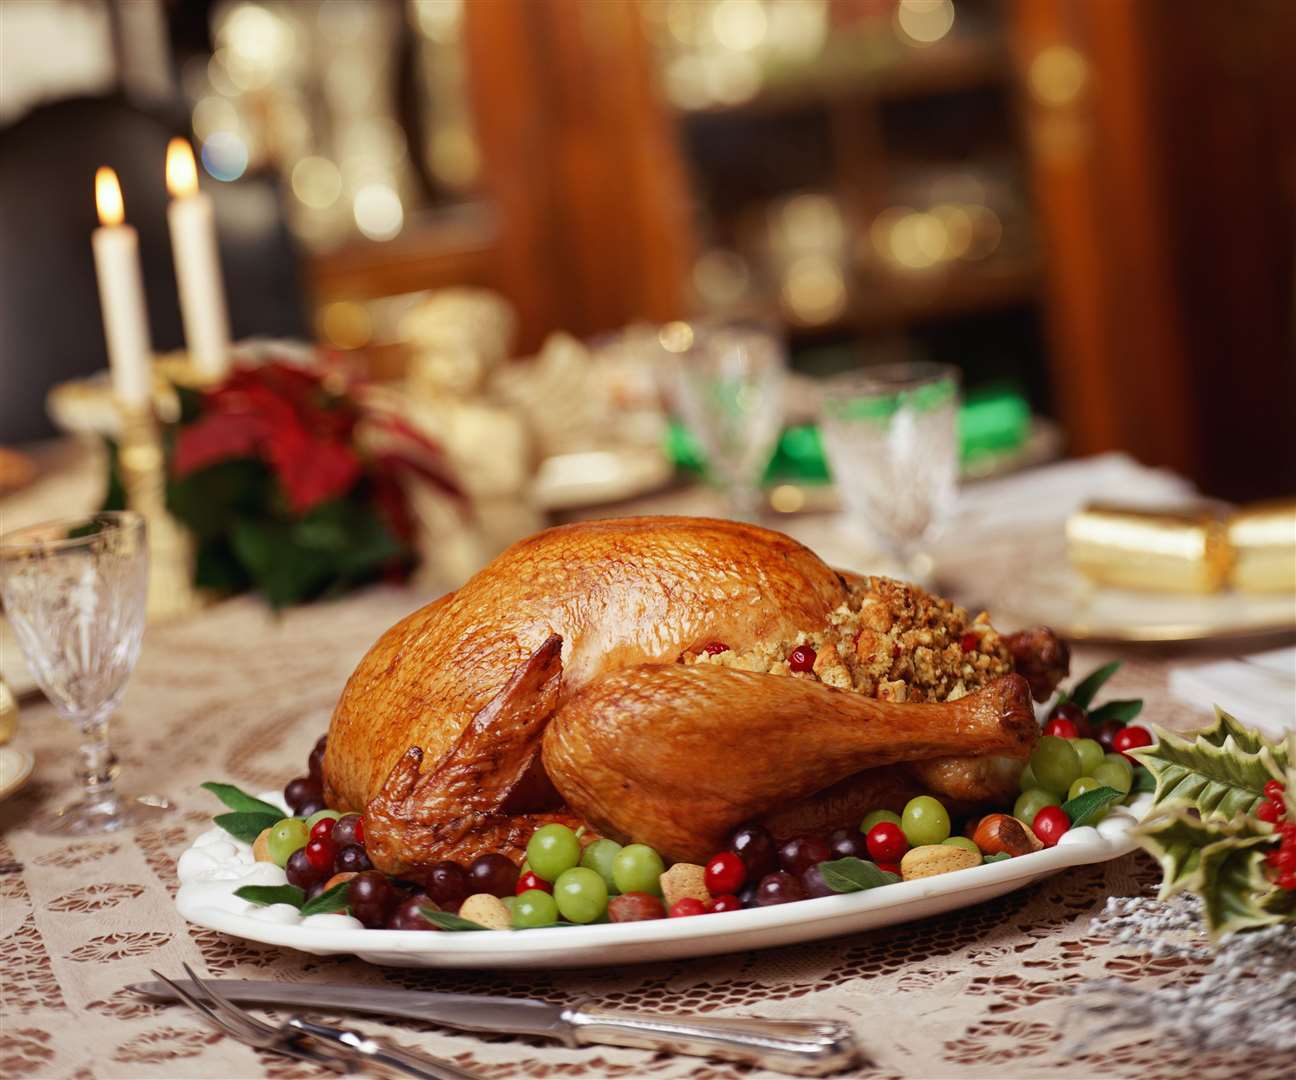 Turkey could be off the table this Christmas without a solution Picture: Thinkstock